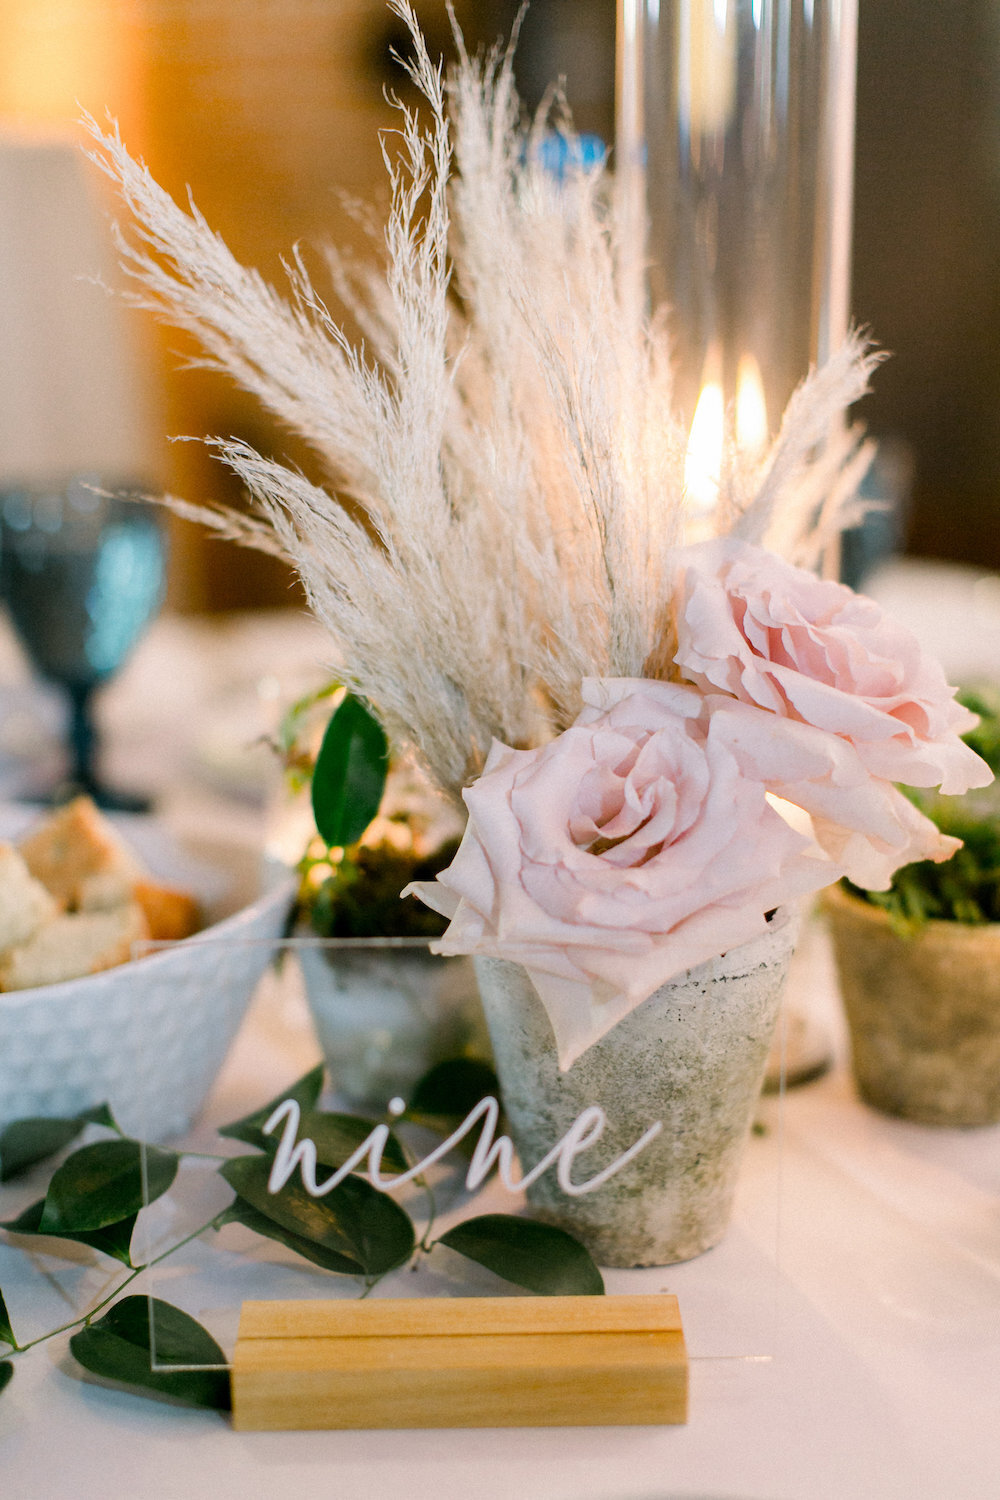 Love & Luster Floral Design quicksand roses pampas grass wedding centerpiece at The Booking House